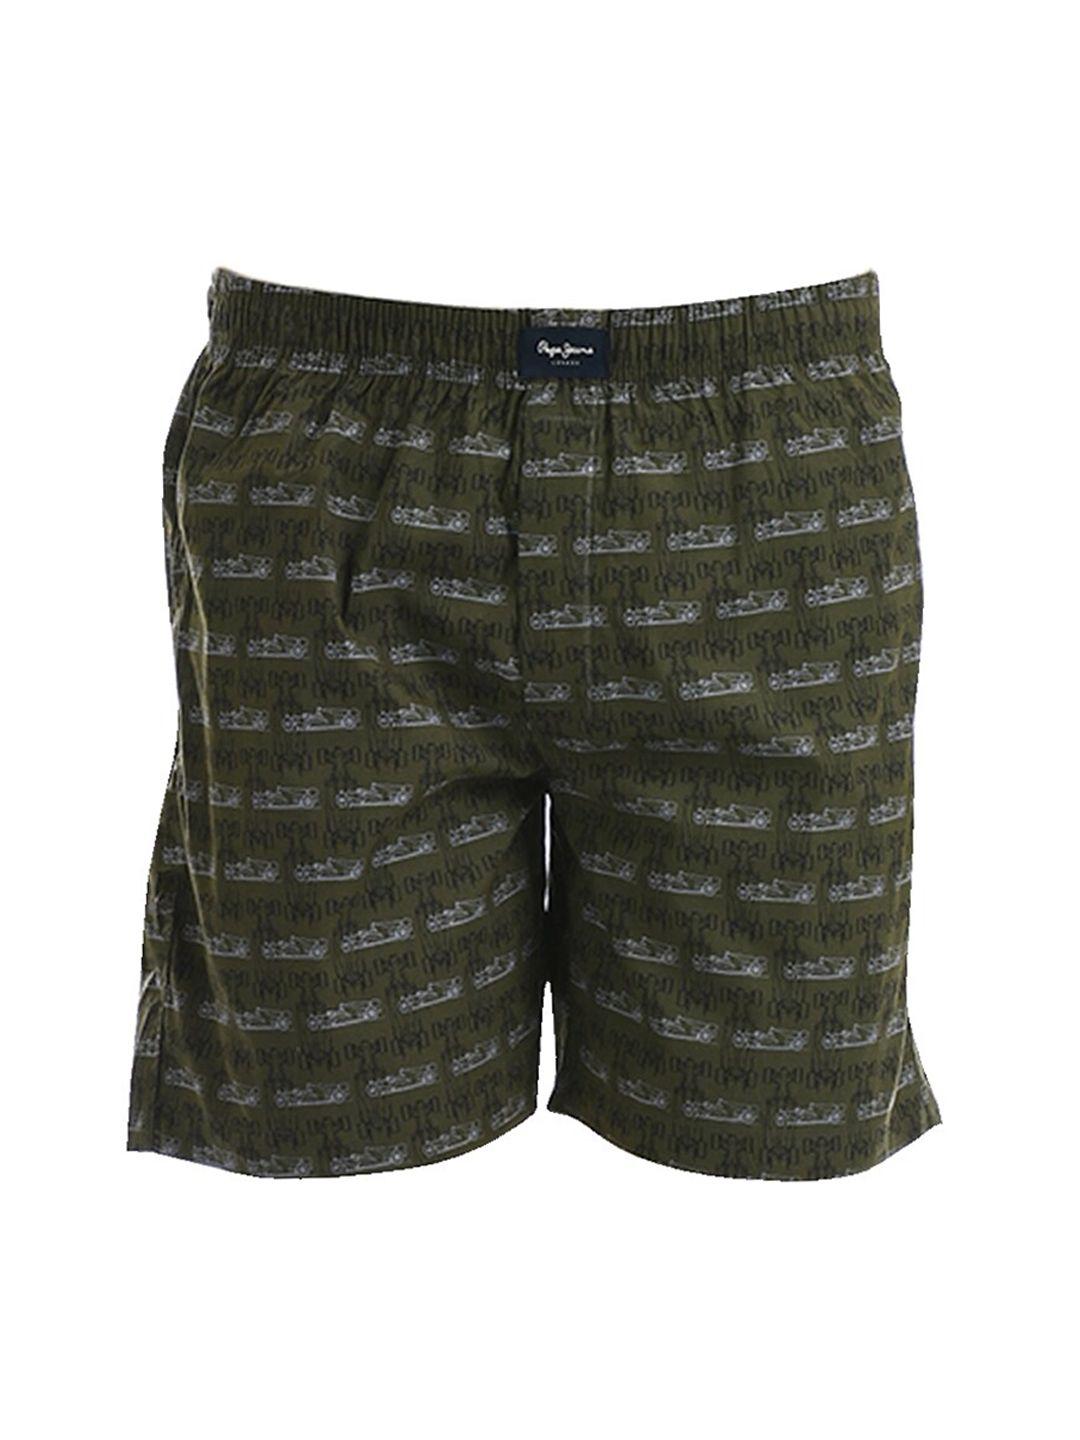 pepe-jeans-men-olive-green-&-white-printed-boxers-8904311332374